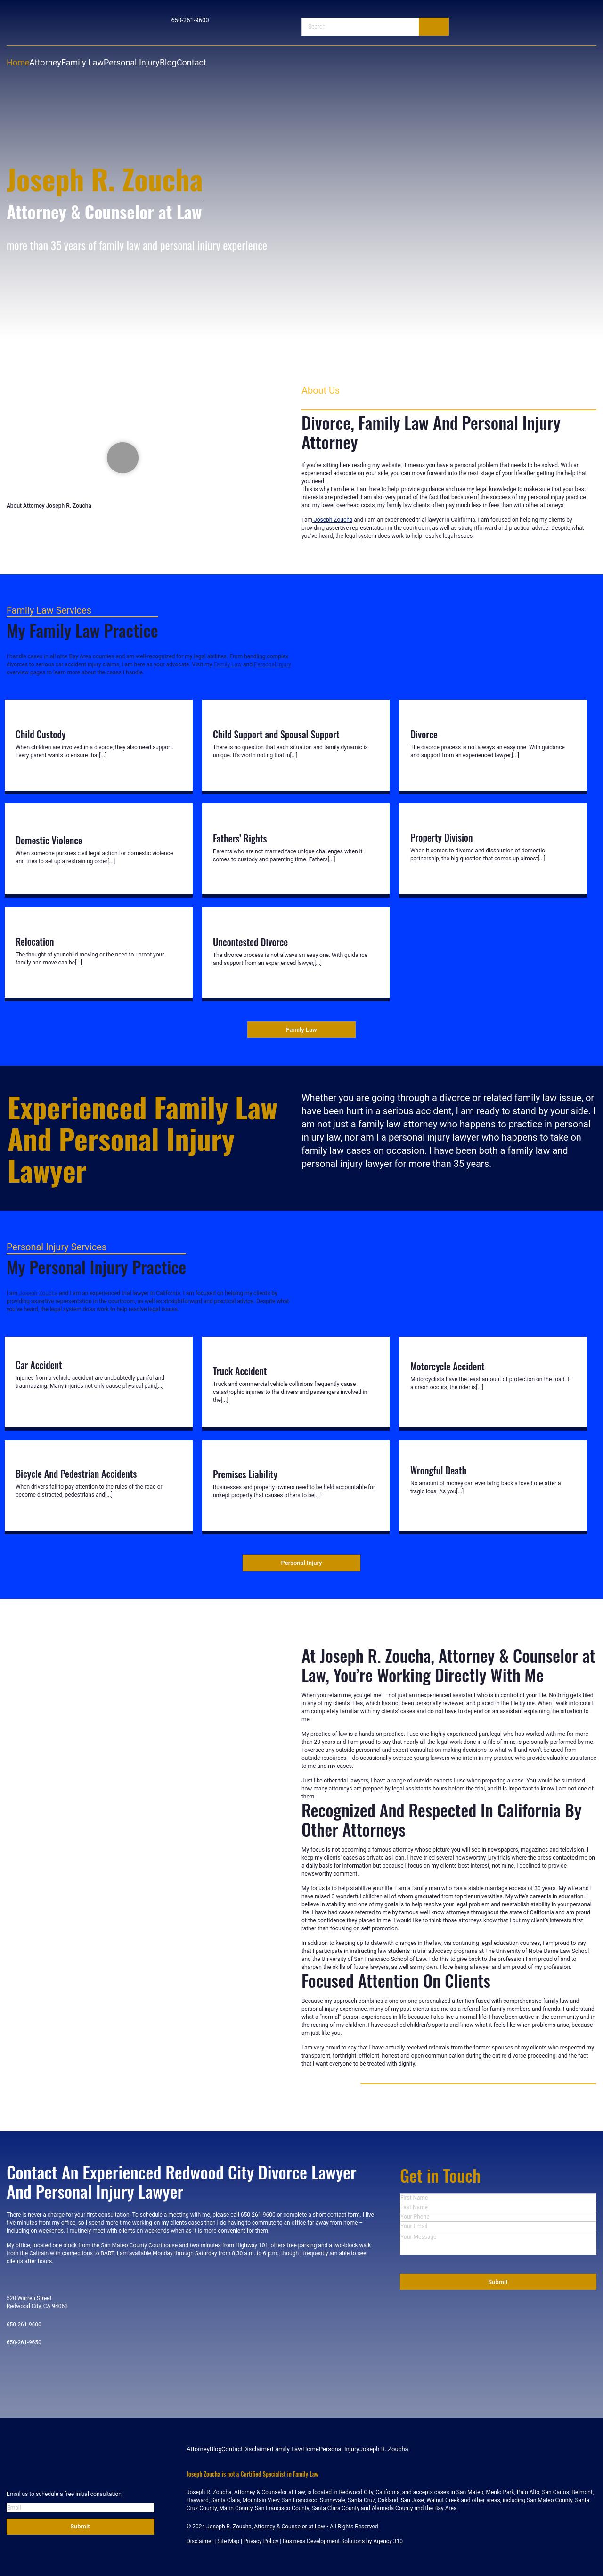 Joseph R. Zoucha, Attorney & Counselor at Law - Redwood City CA Lawyers